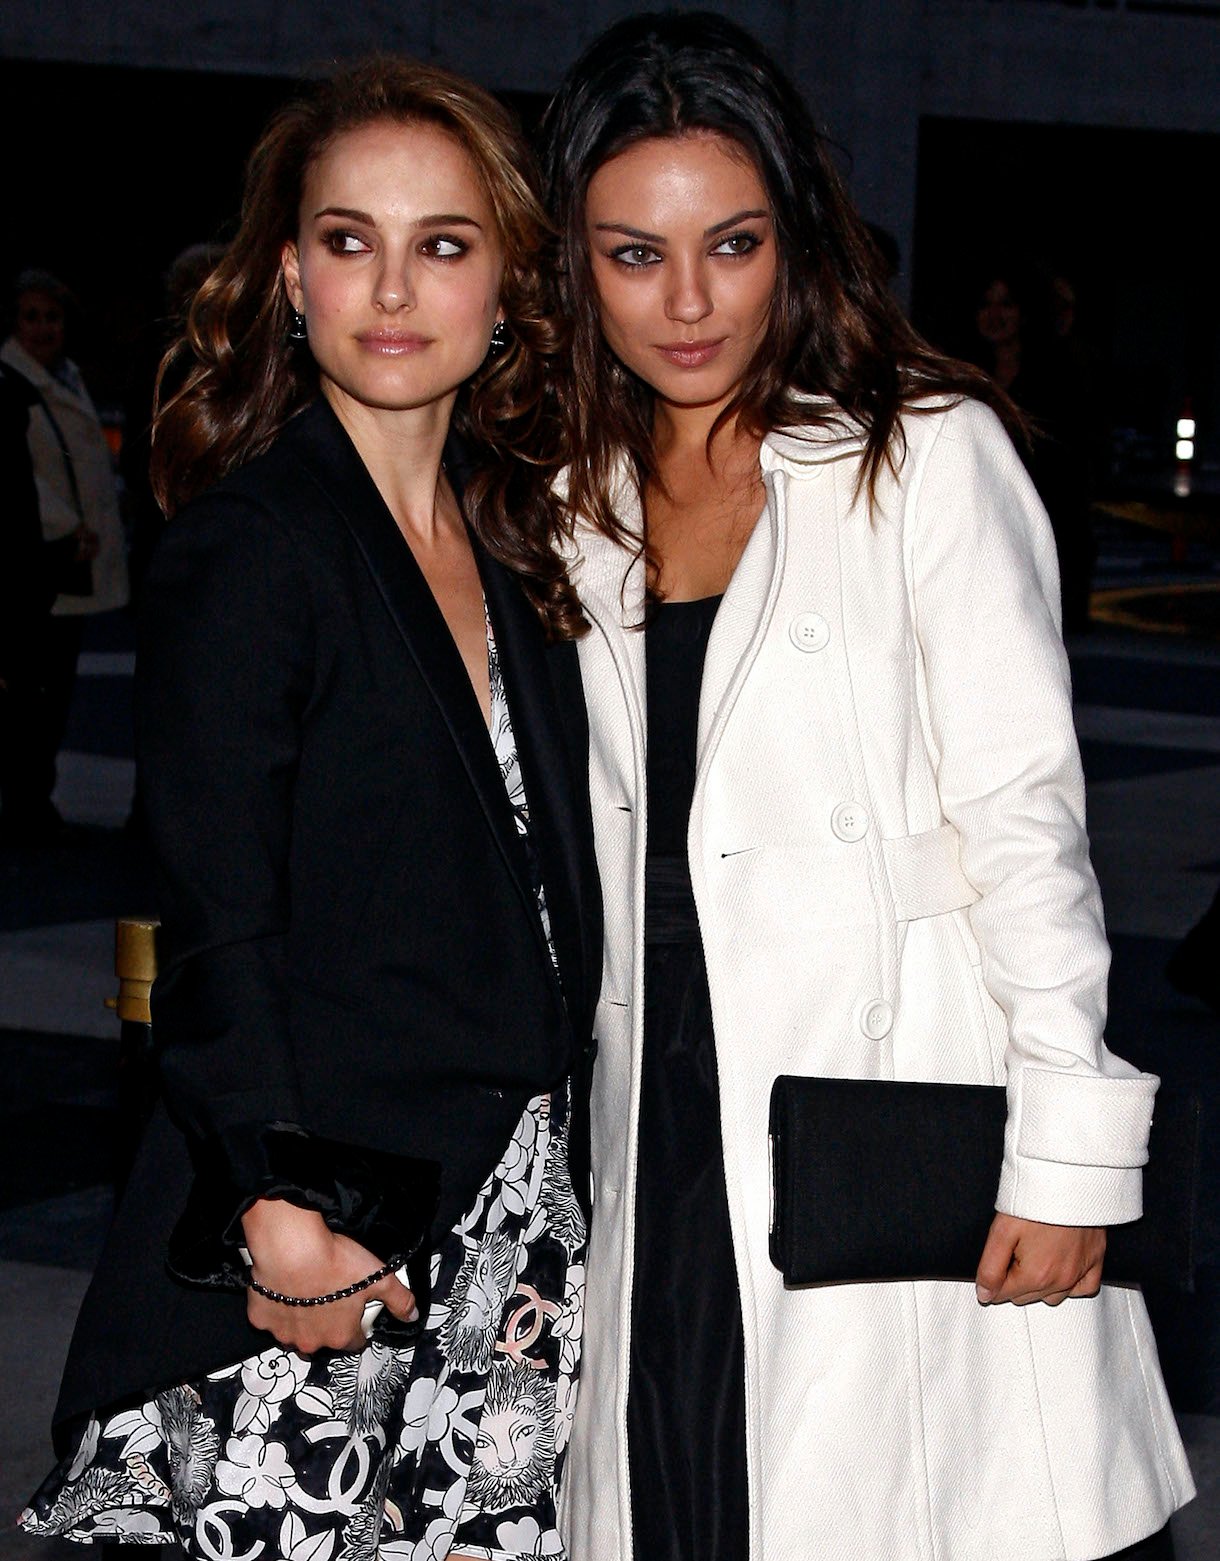 Actresses Natalie Portman and Mila Kunis attend the 2009 American Ballet Theatre Fall Gala